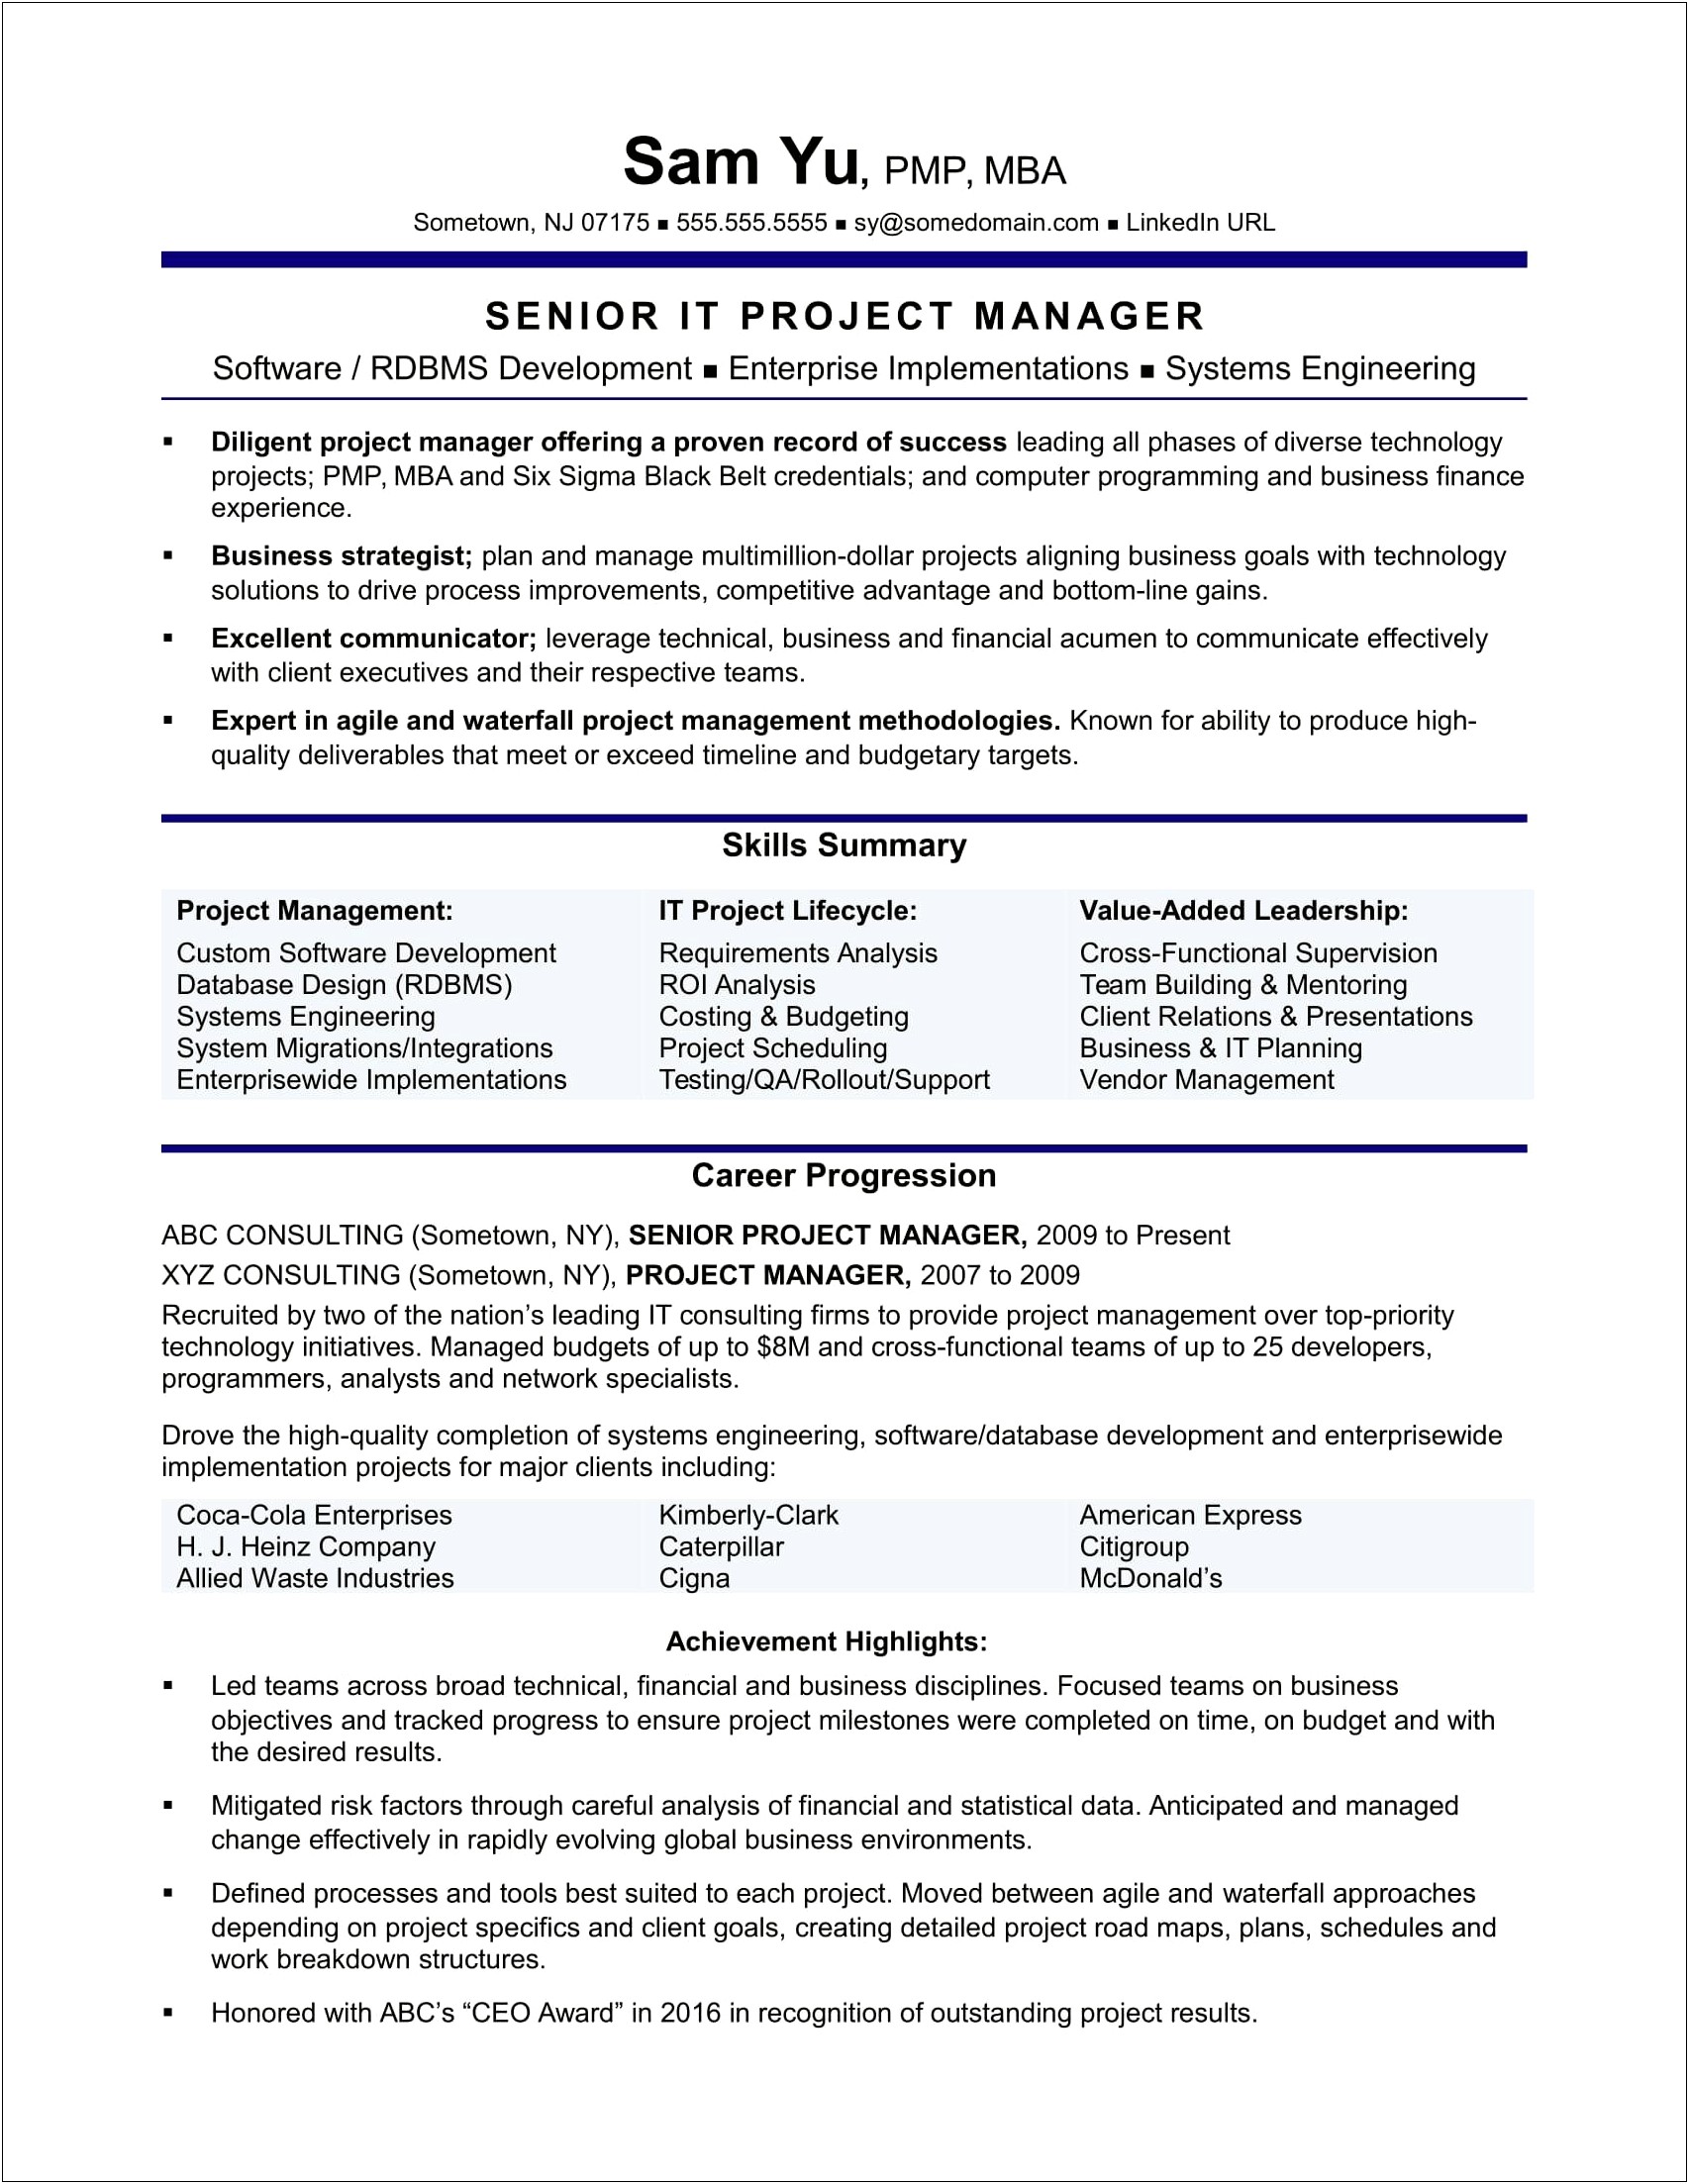 Resume To Illustrate Technical Skills And Past Projects